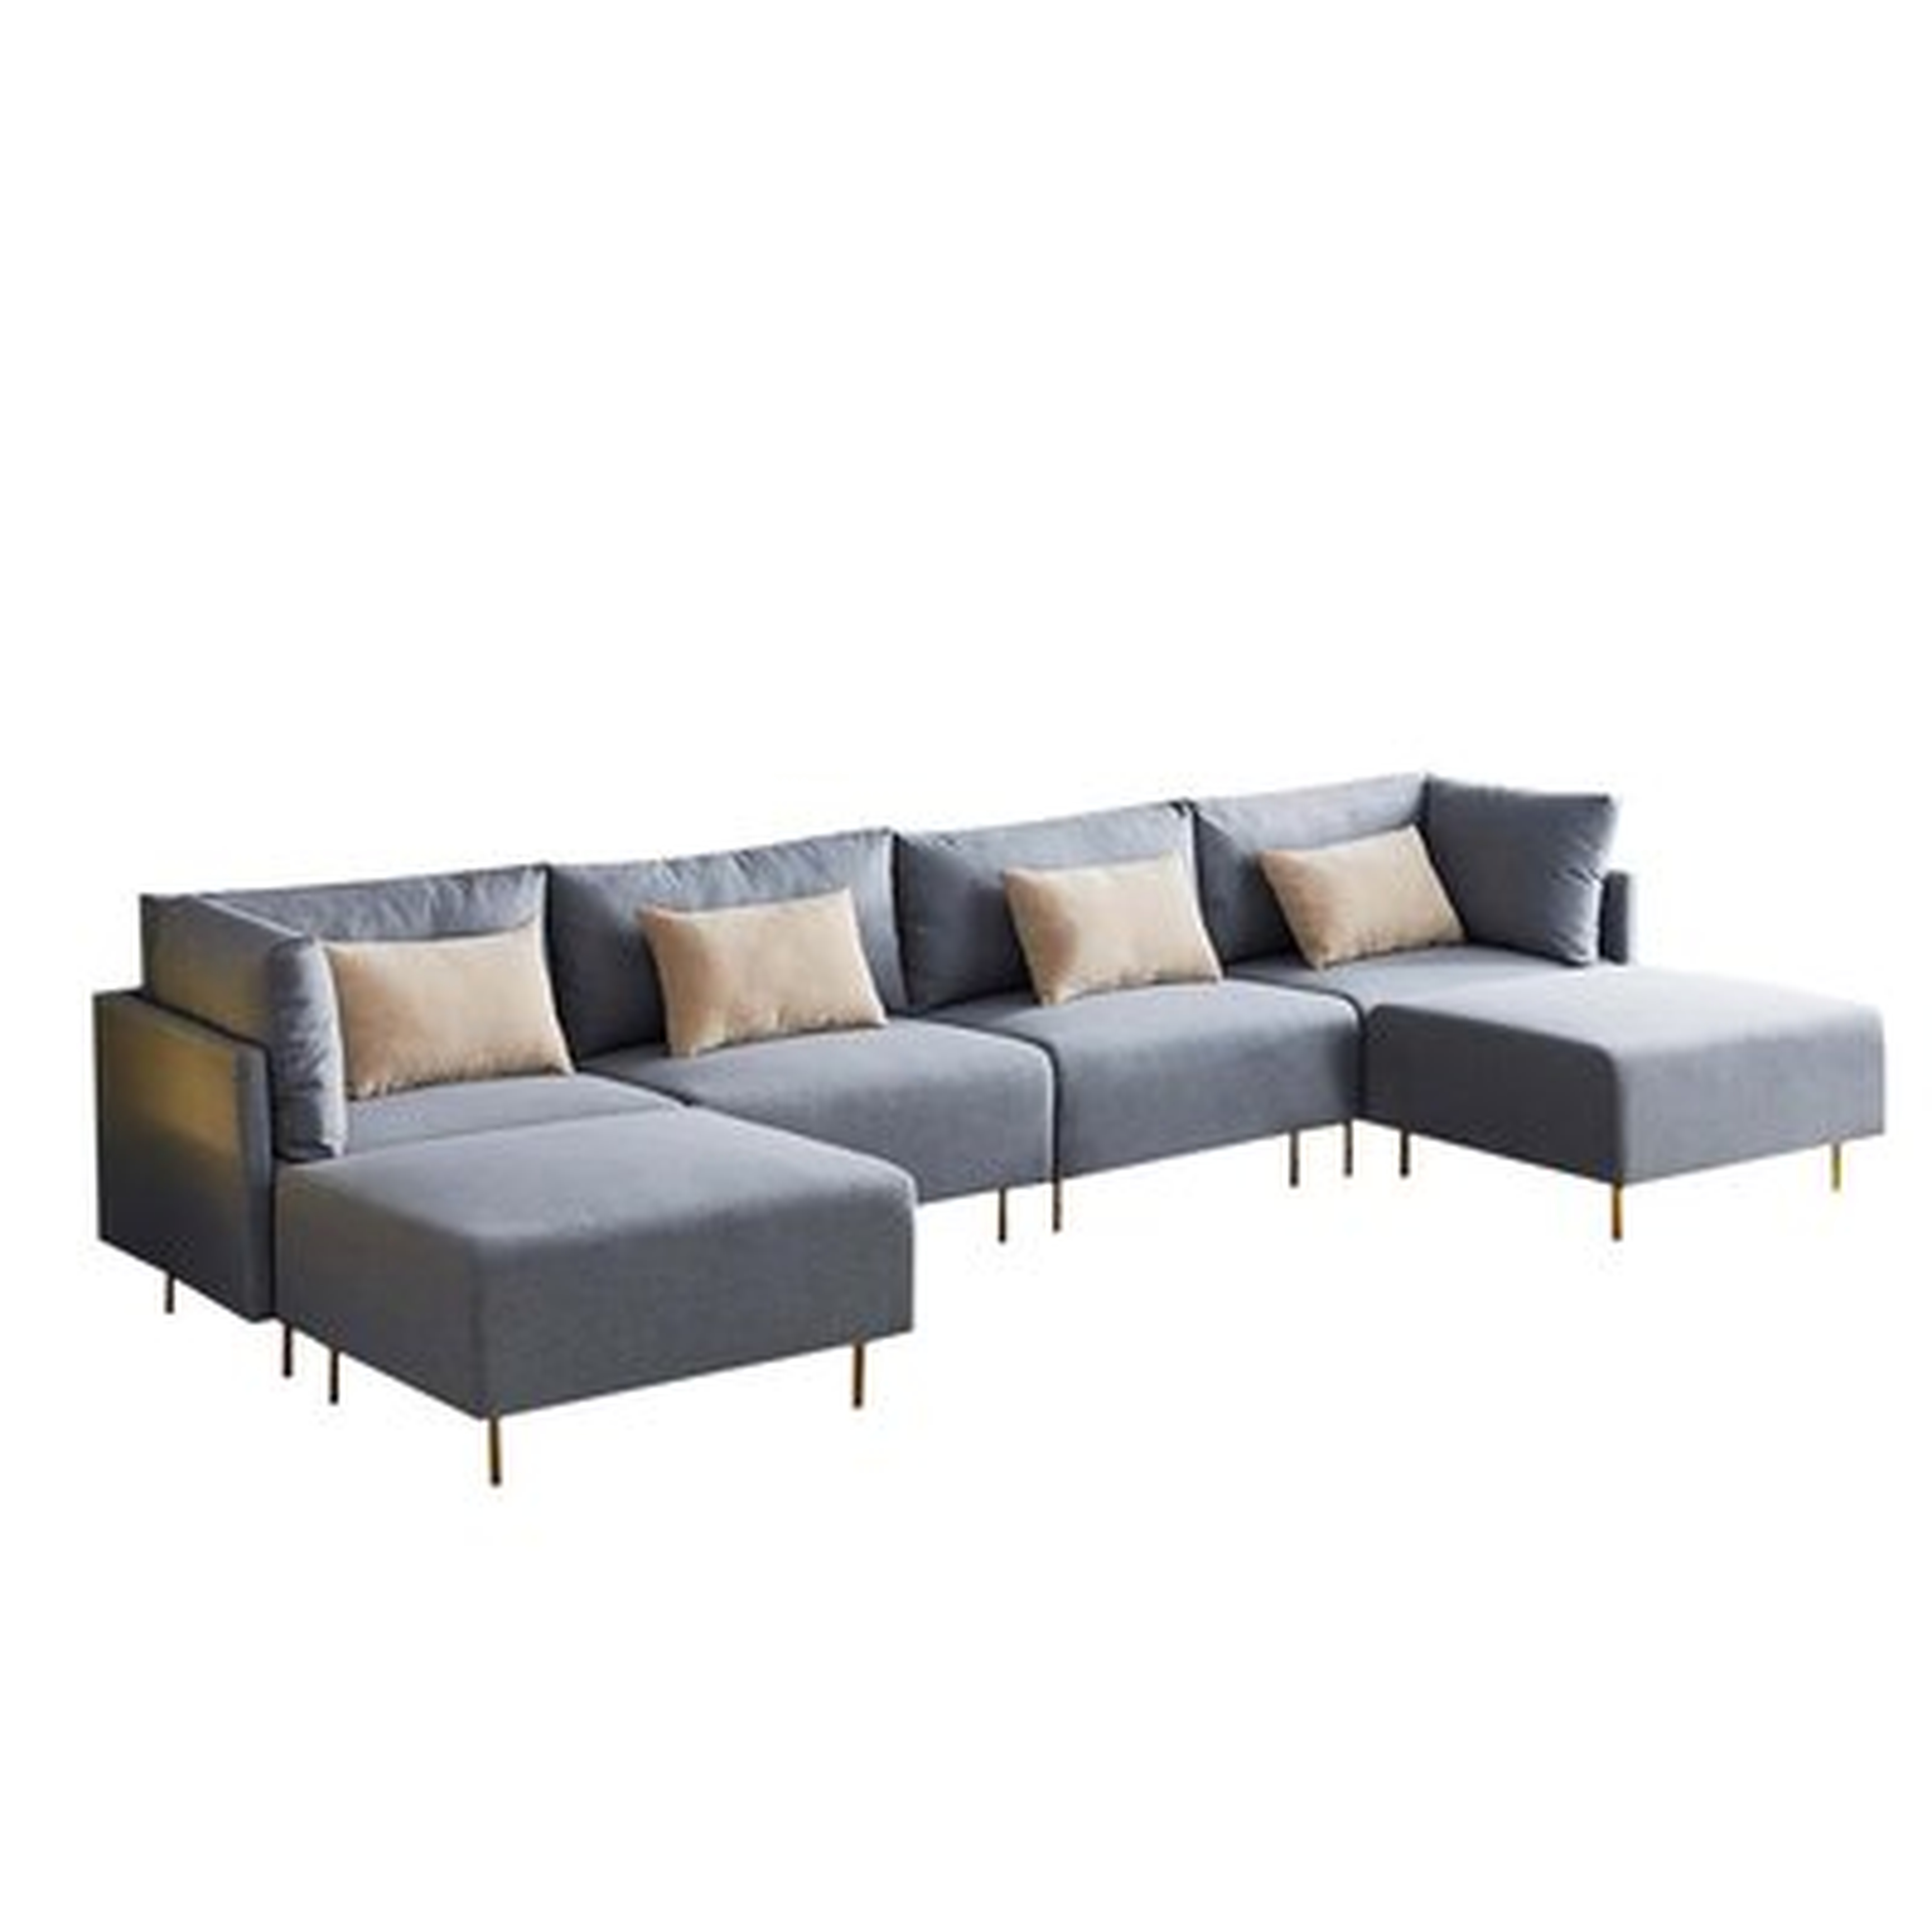 Sofa U Shaped Couch With Reversible Chaise Modular Couch Sectional Sofa With Ottomans And Removable Pillows - Wayfair